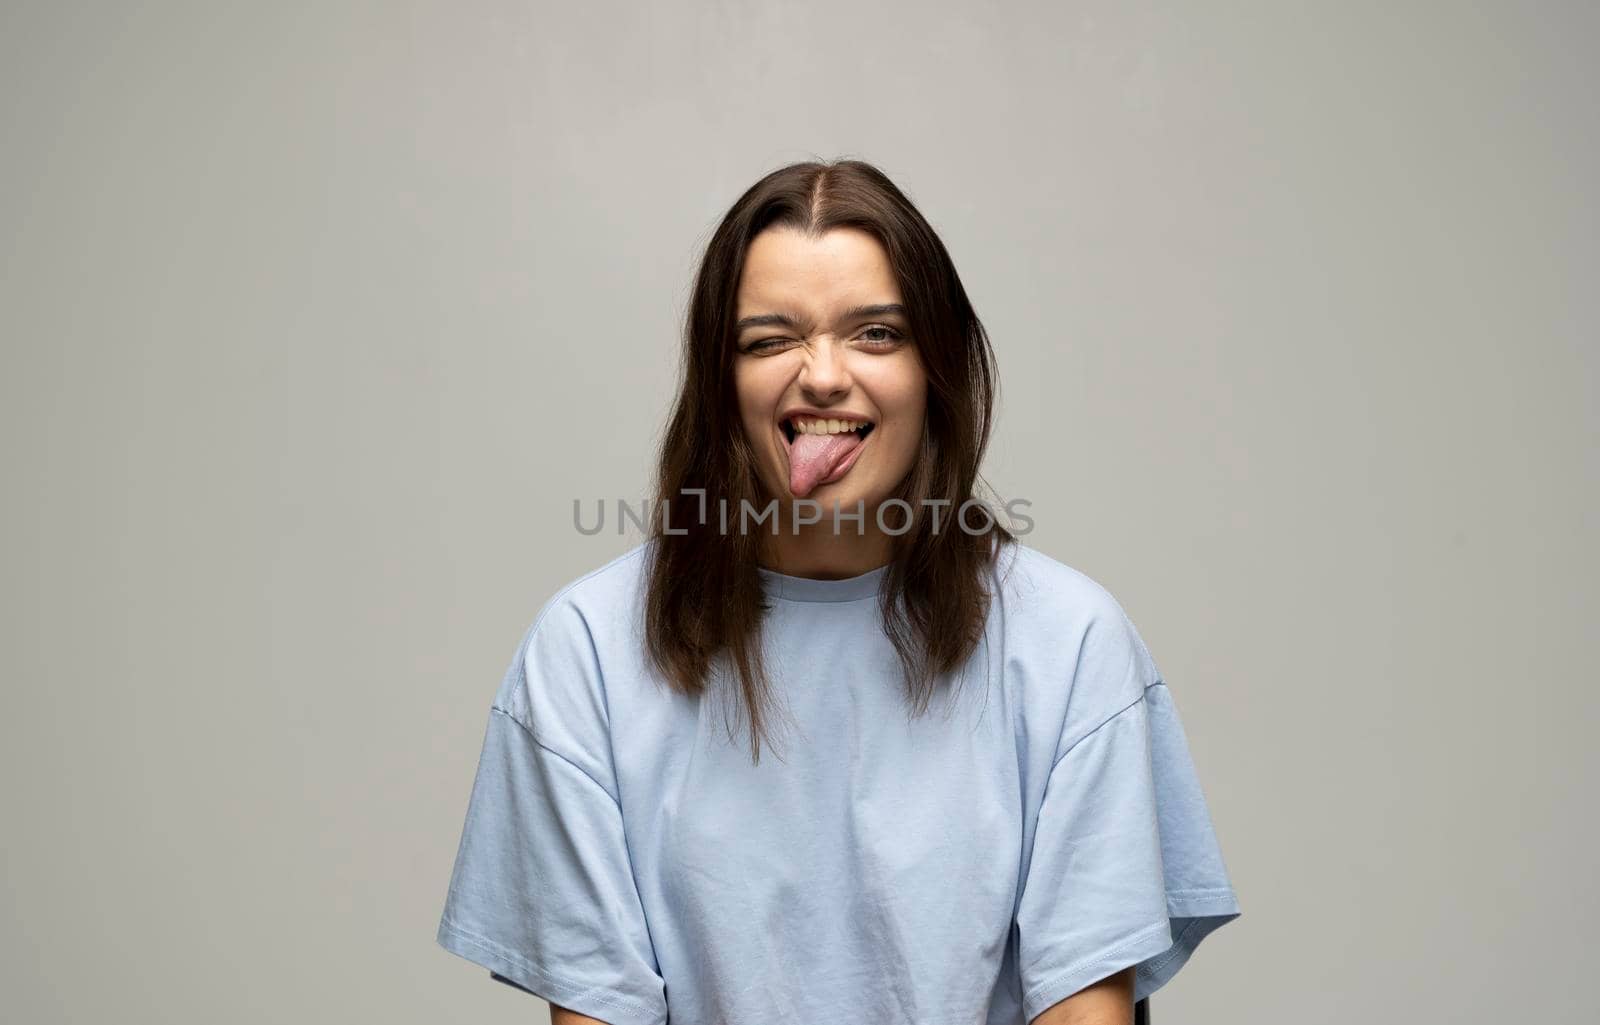 Portrait of young beautiful cute cheerful brunette girl in blue t-shirt smiling looking at camera and showing a tongue over white background studio. Emotions